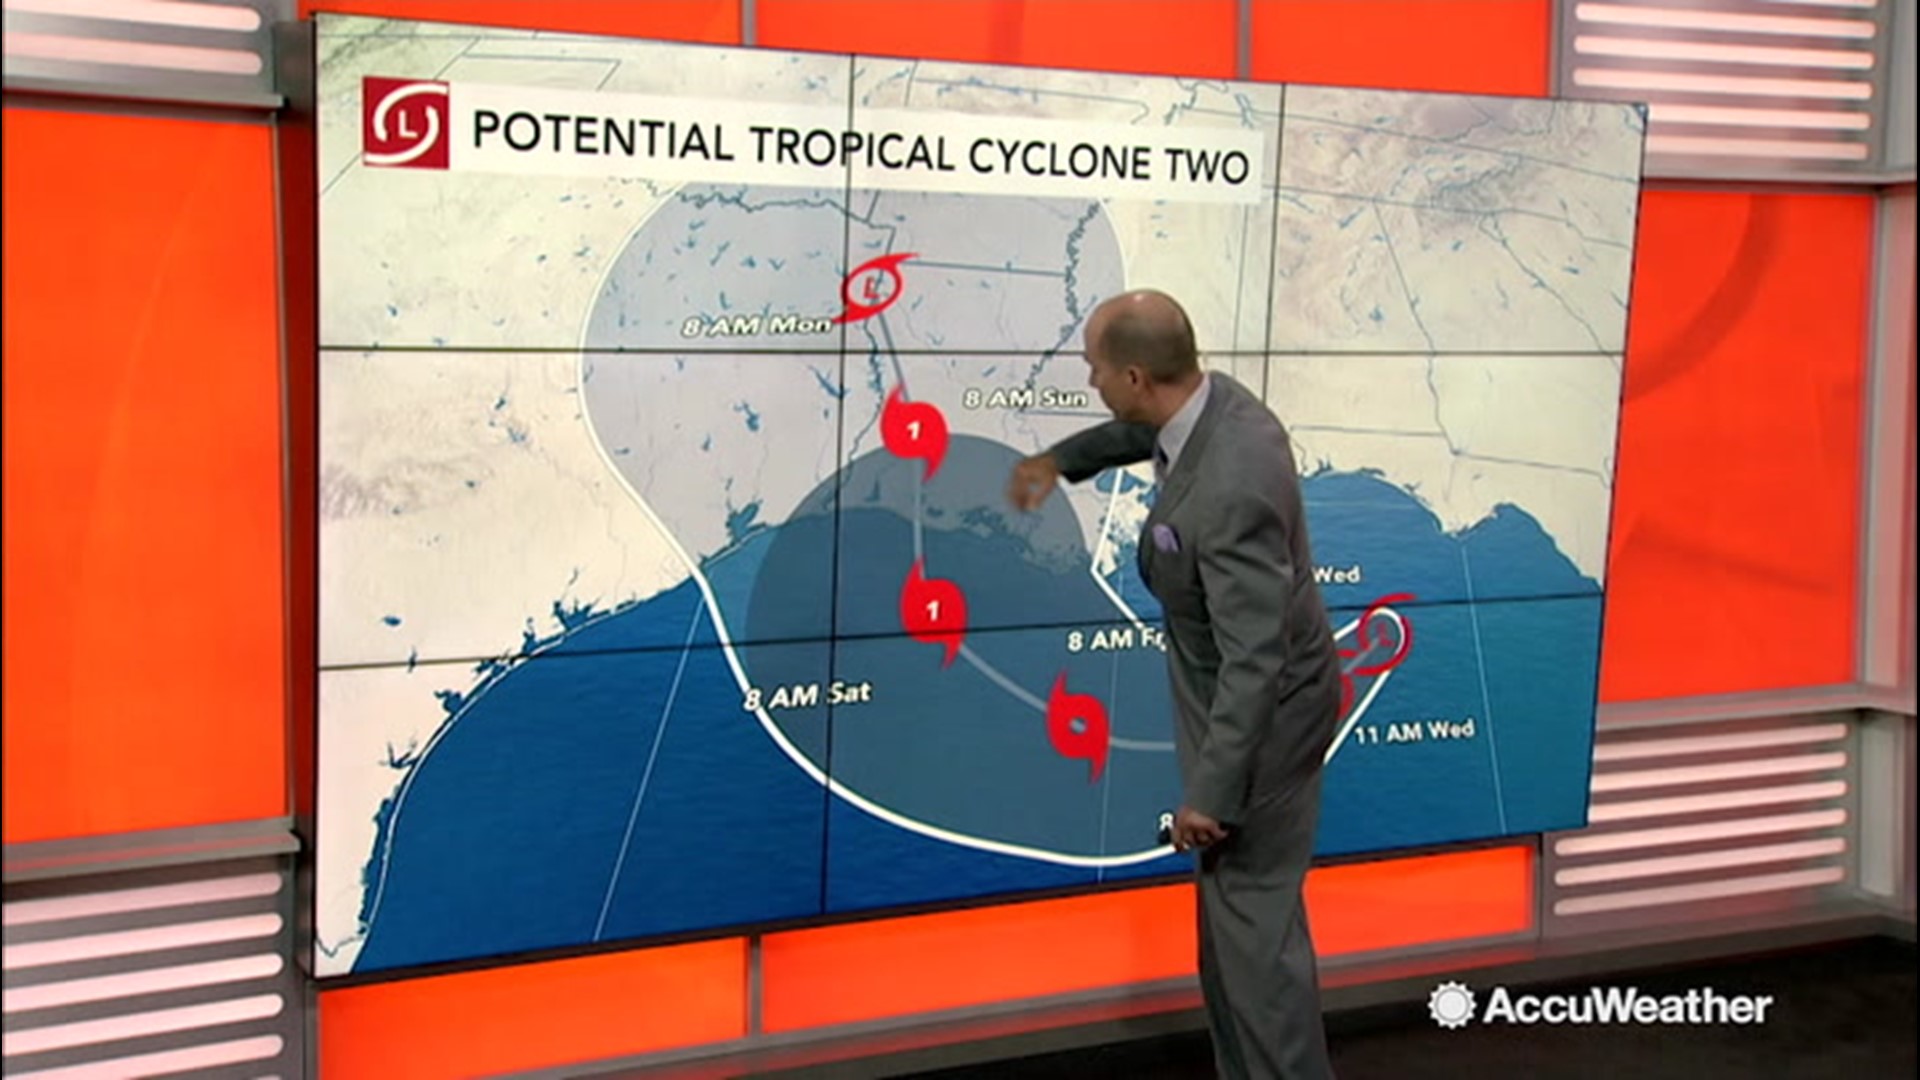 AccuWeather broadcast meteorologist Bernie Rayno explains all the factors involved with the track the developing tropical storm could take and how much total rainfall it could dump on different places along the Gulf Coast.